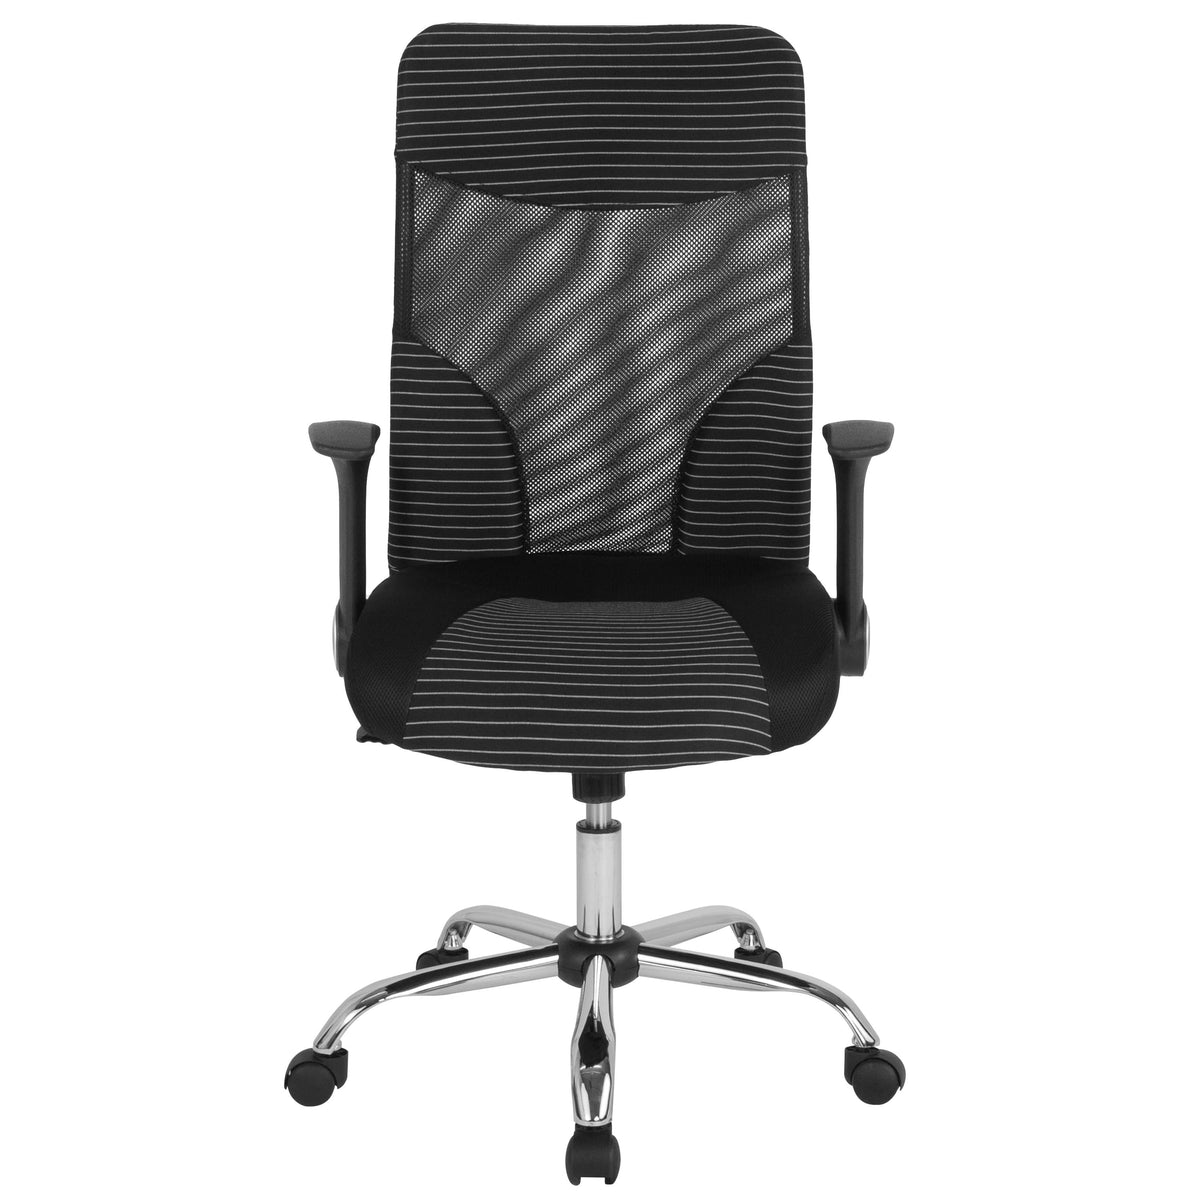 High Back Ergonomic Office Chair with Black and White Contemporary Mesh Design